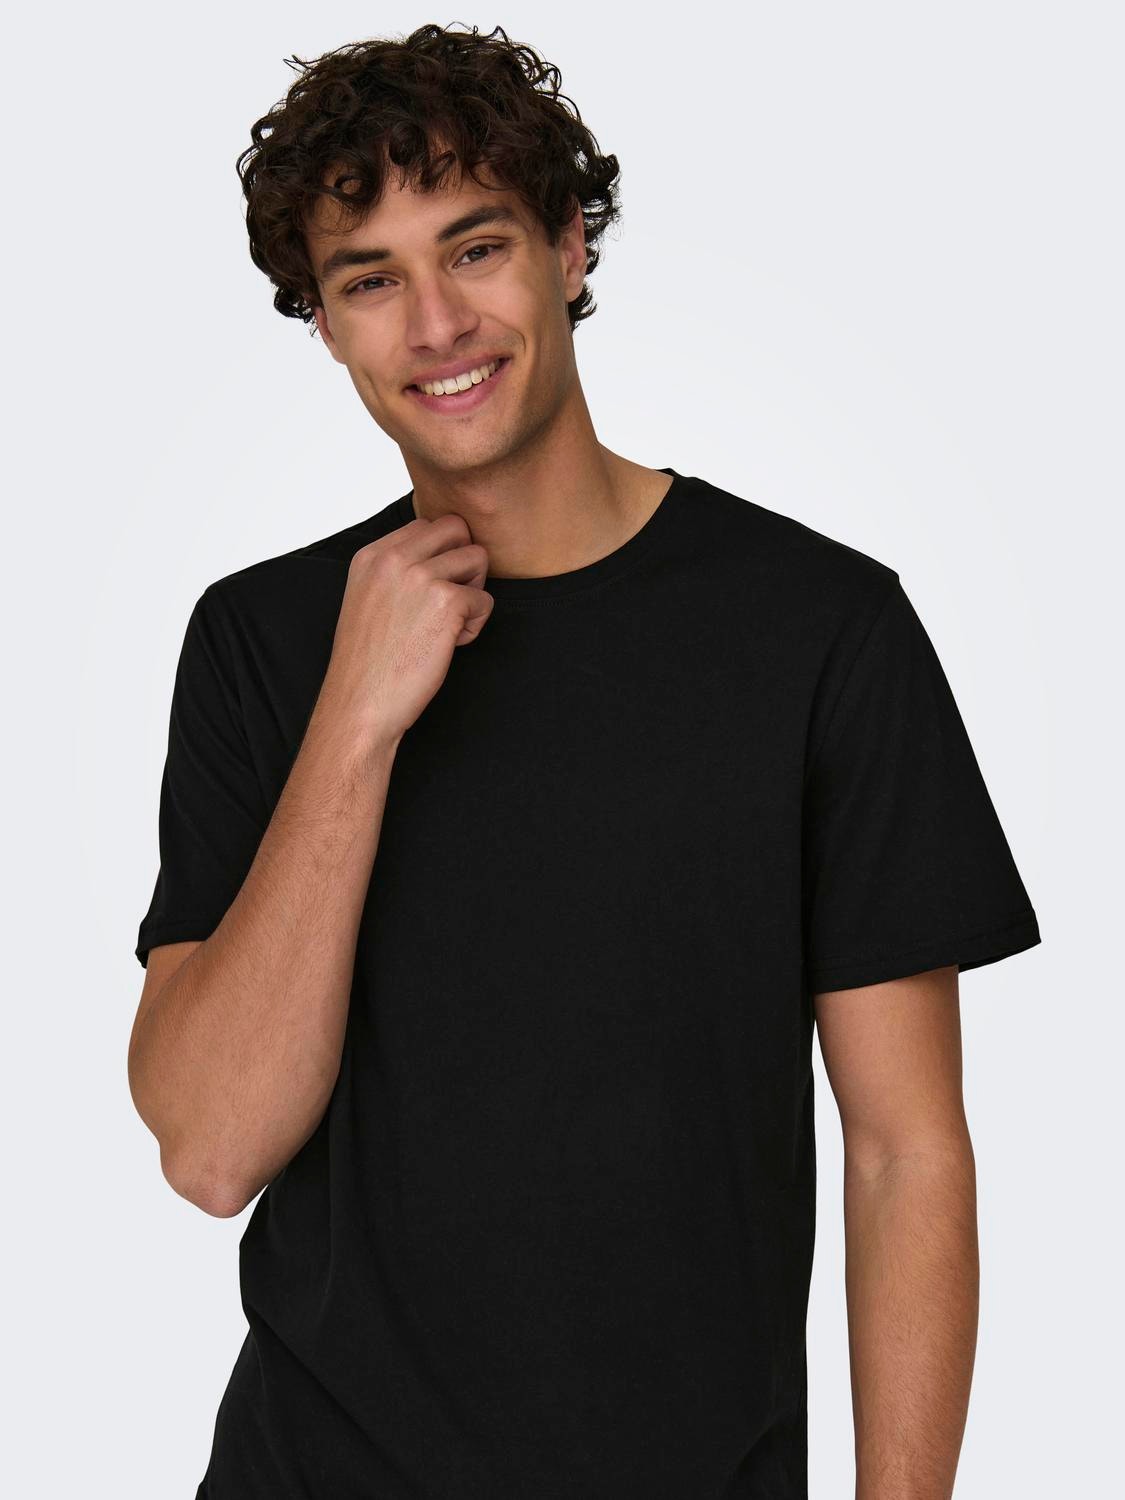 ONLY & SONS Long o-neck t-shirt -Black - 22002973